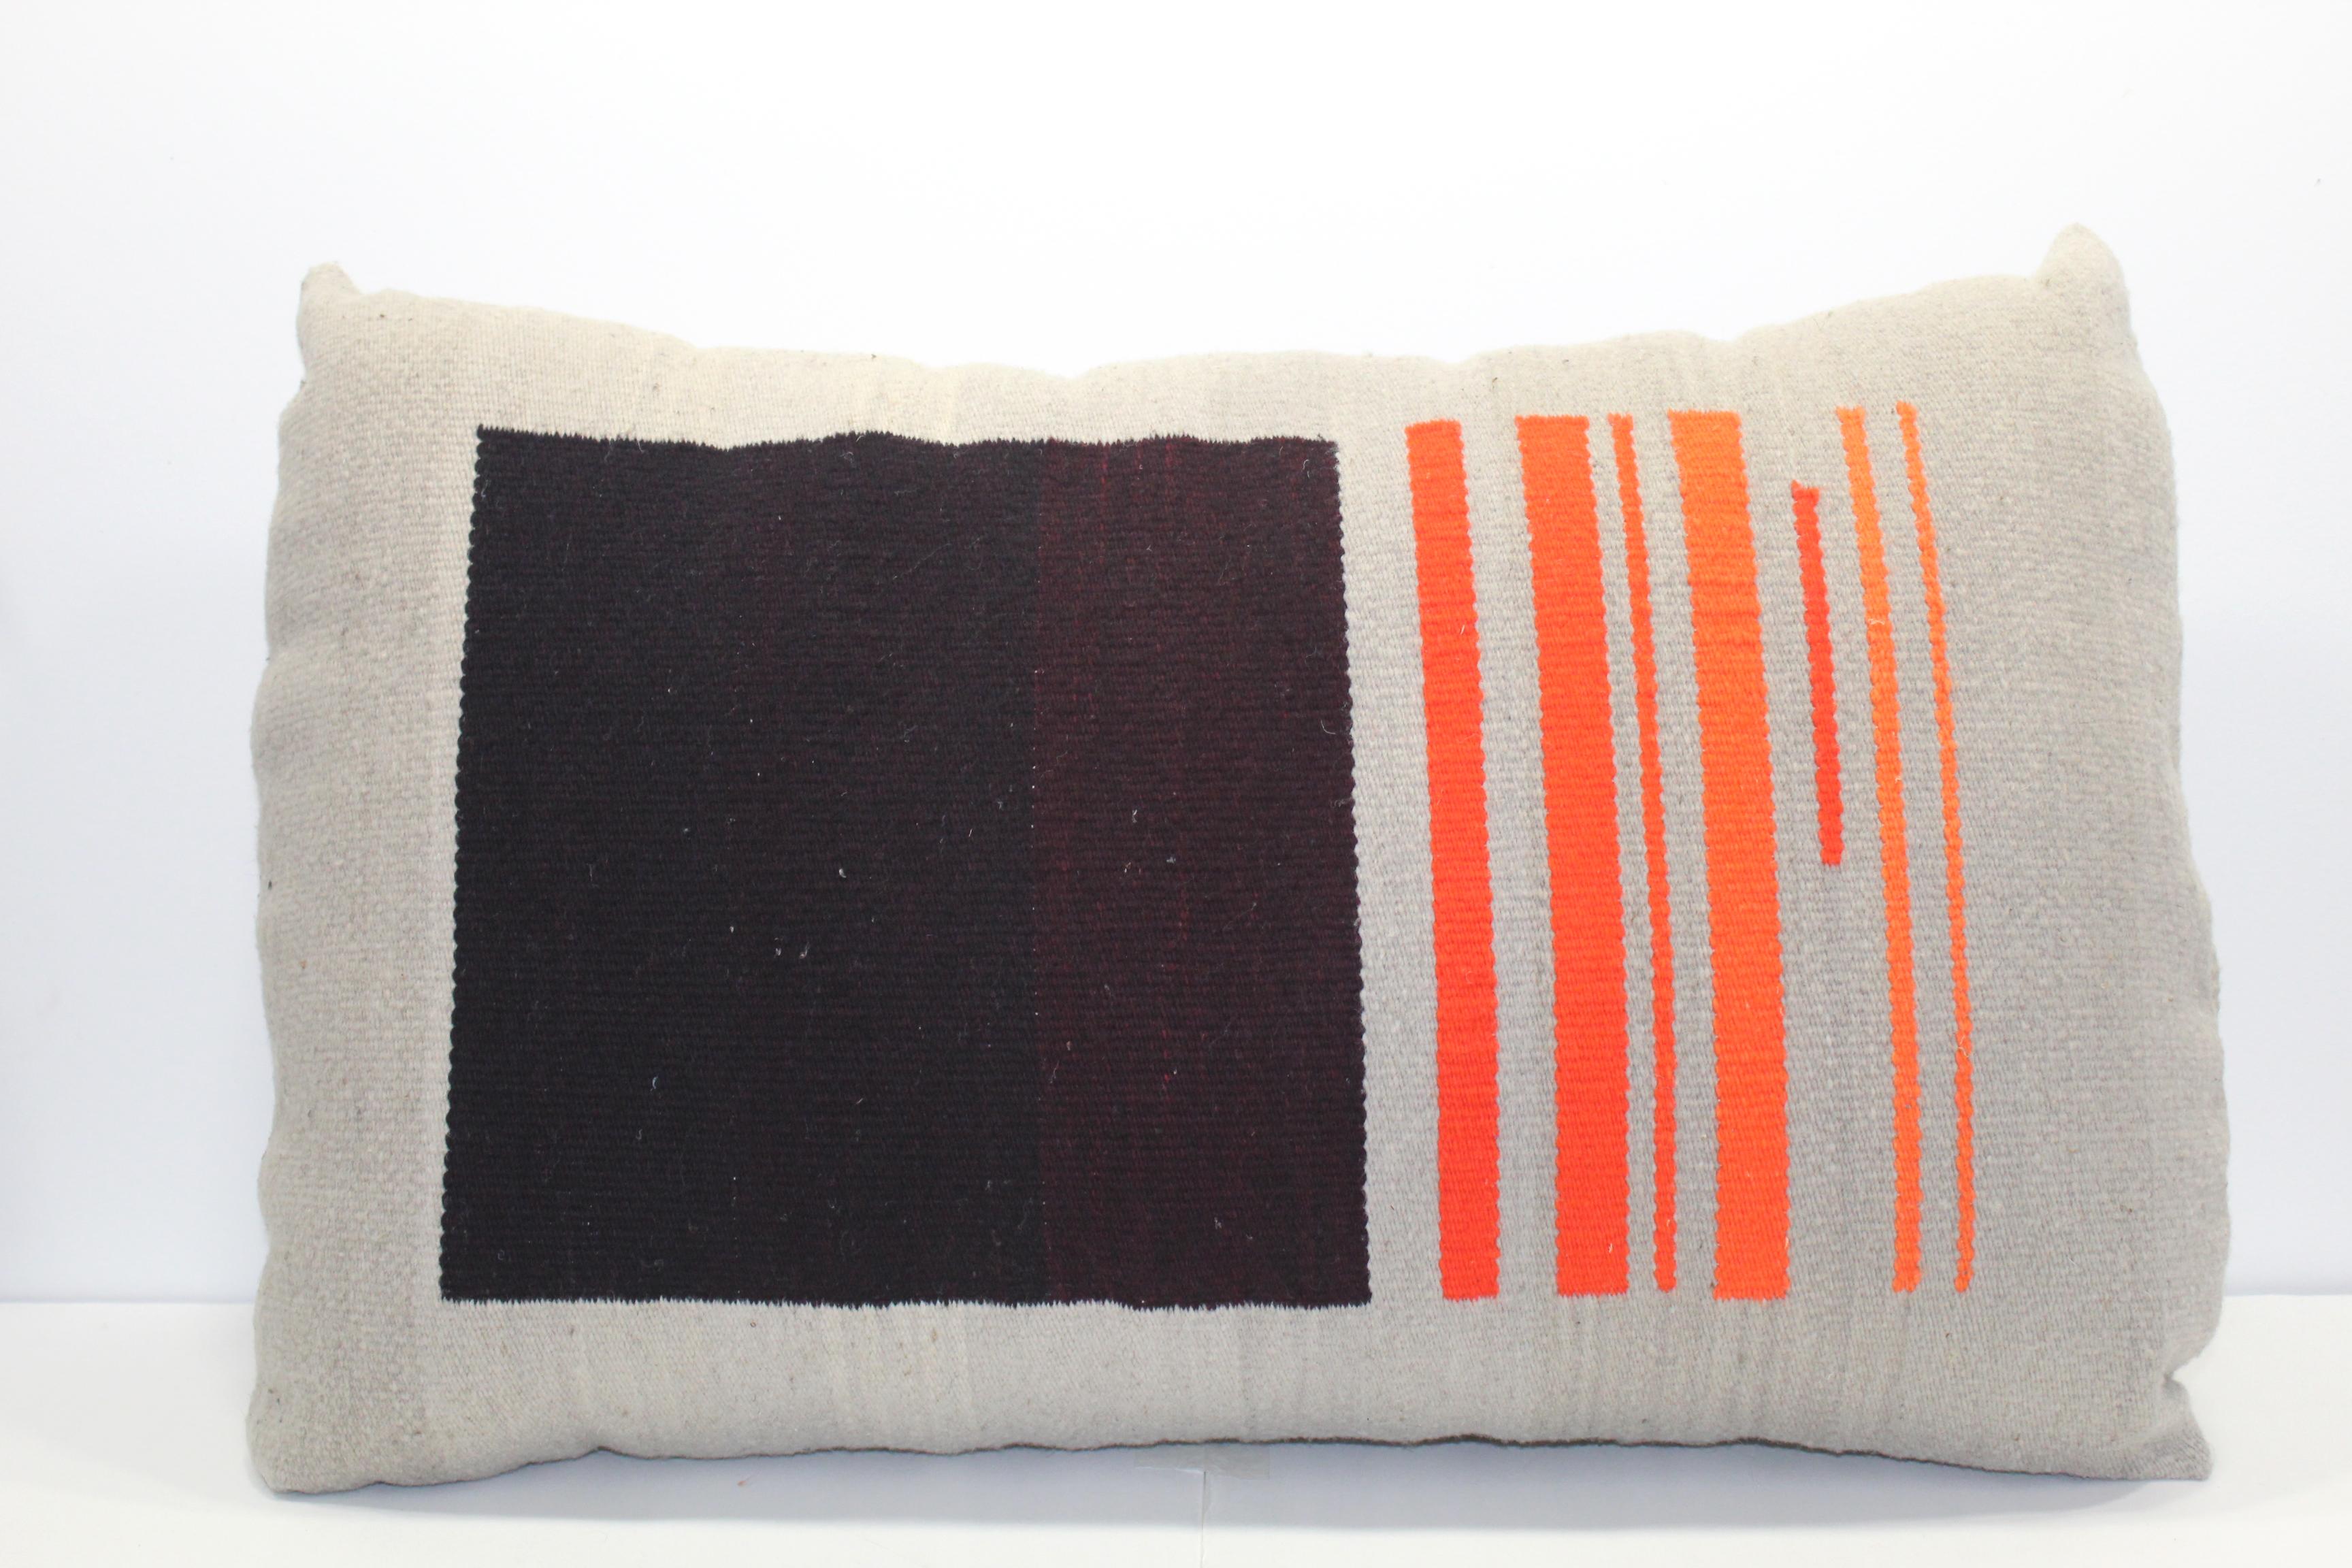 Contemporary handwoven wool throw pillow in red, orange and grey. 

Each color included in this pillow was hand-dyed with natural materials by the artist to achieve the subtle variety in tones. The shades of red and orange were created with